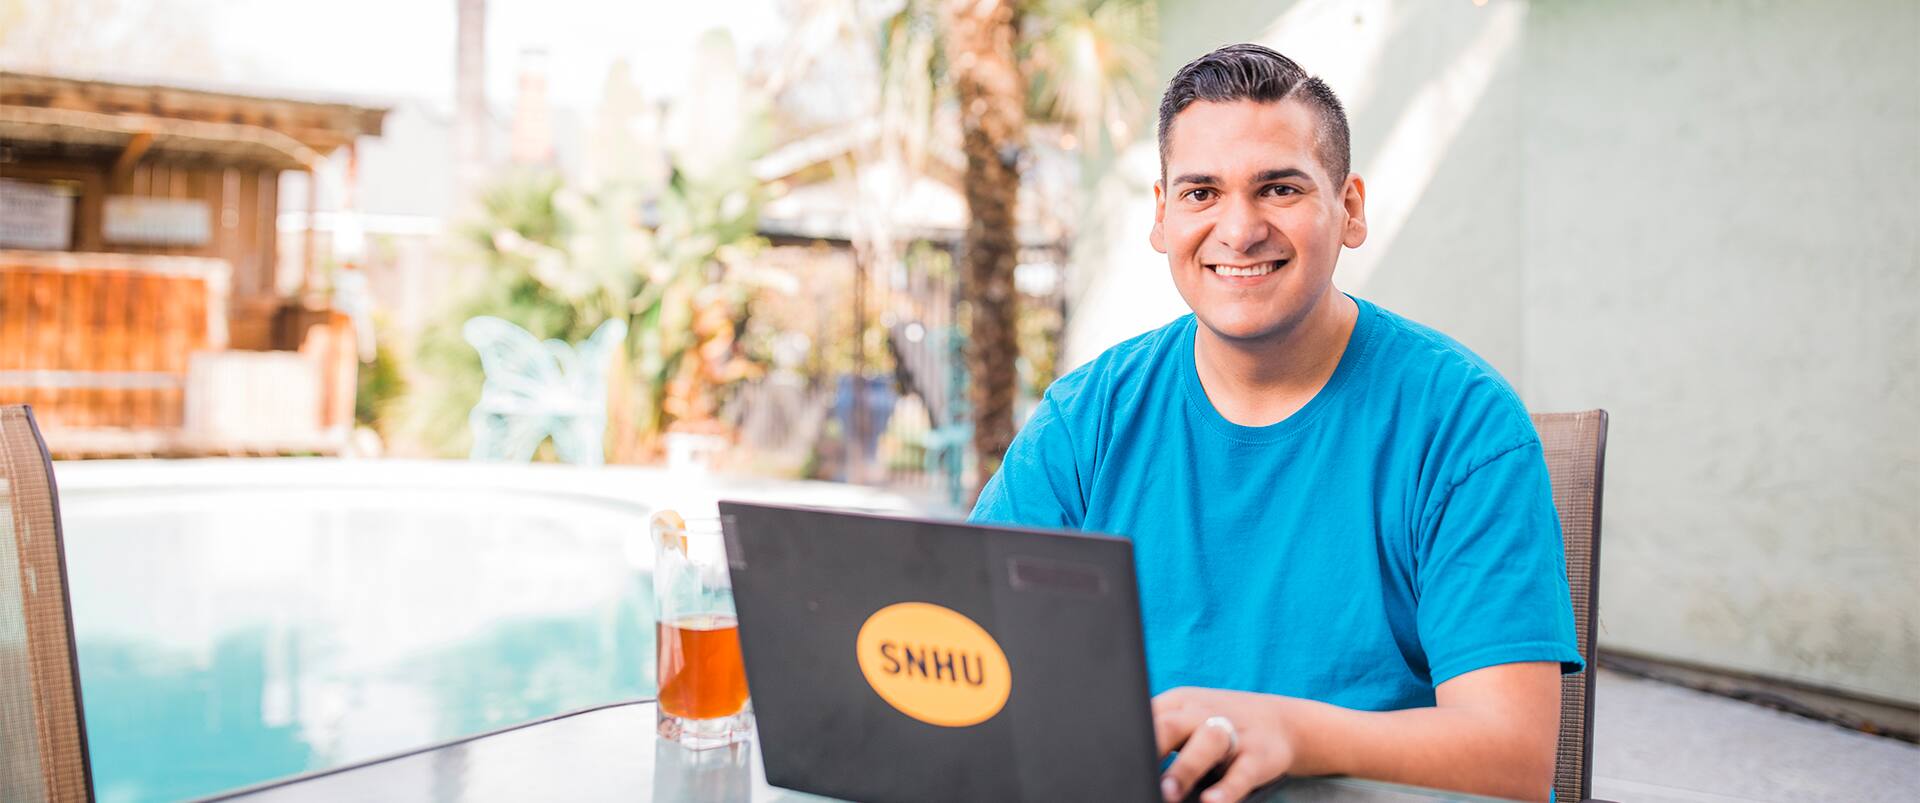 Juan Munoz, who earned his general studies degree in 2022, smiling and working on his laptop beside a pool and with a glass of ice tea with a lemon beside him.